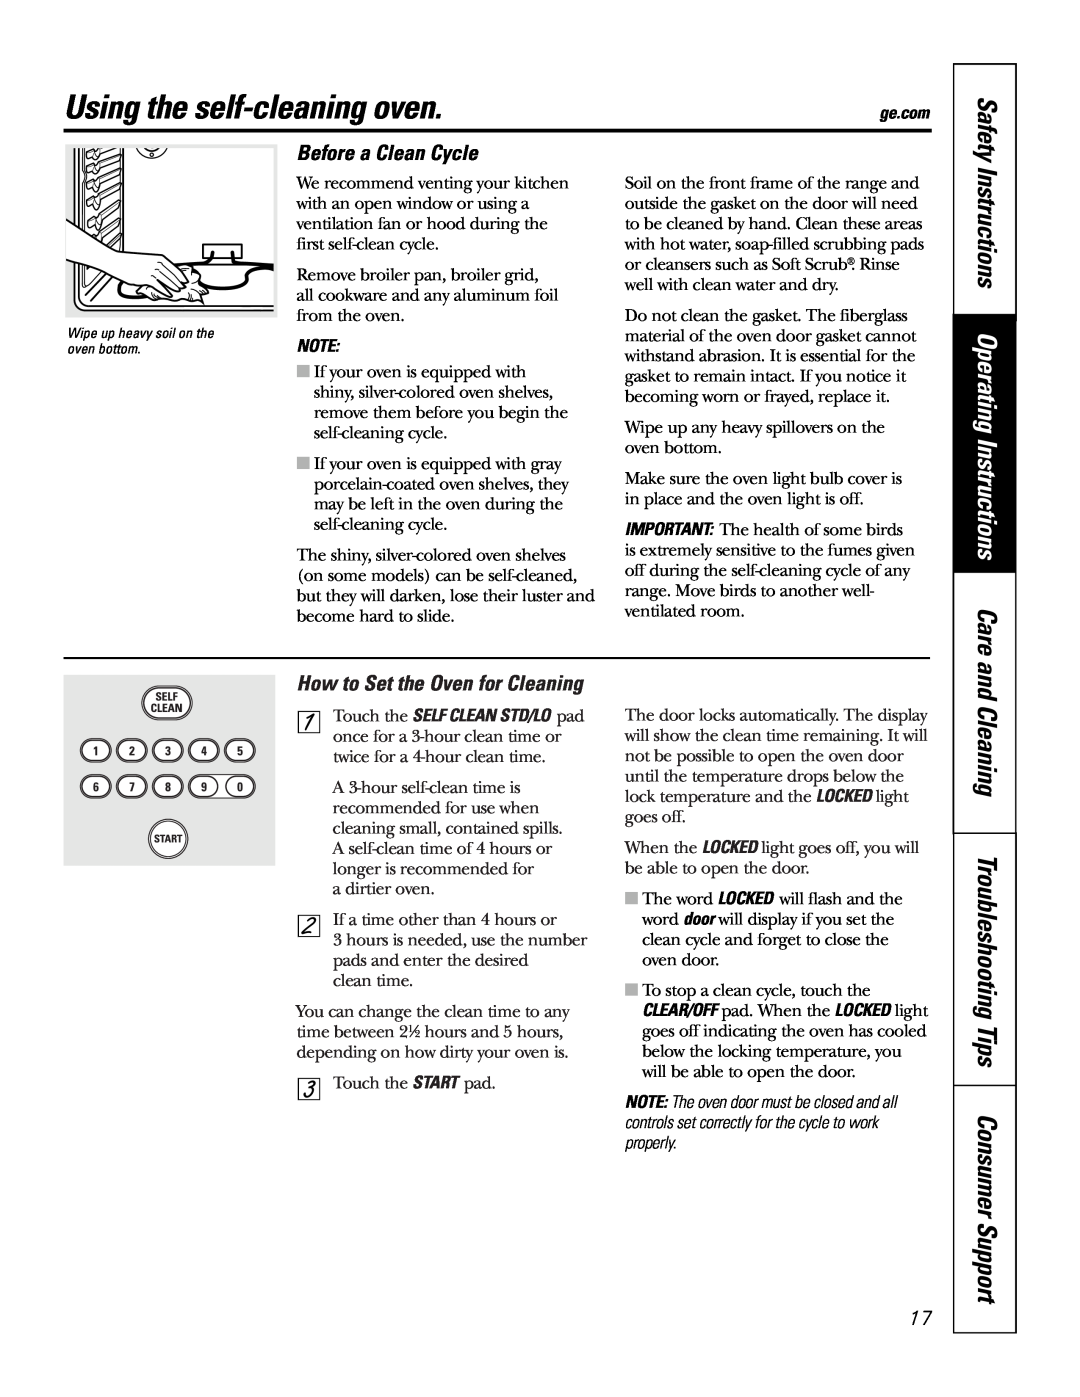 GE JBP49 owner manual Using the self-cleaning oven, Safety, Instructions Operating Instructions Care, Before a Clean Cycle 